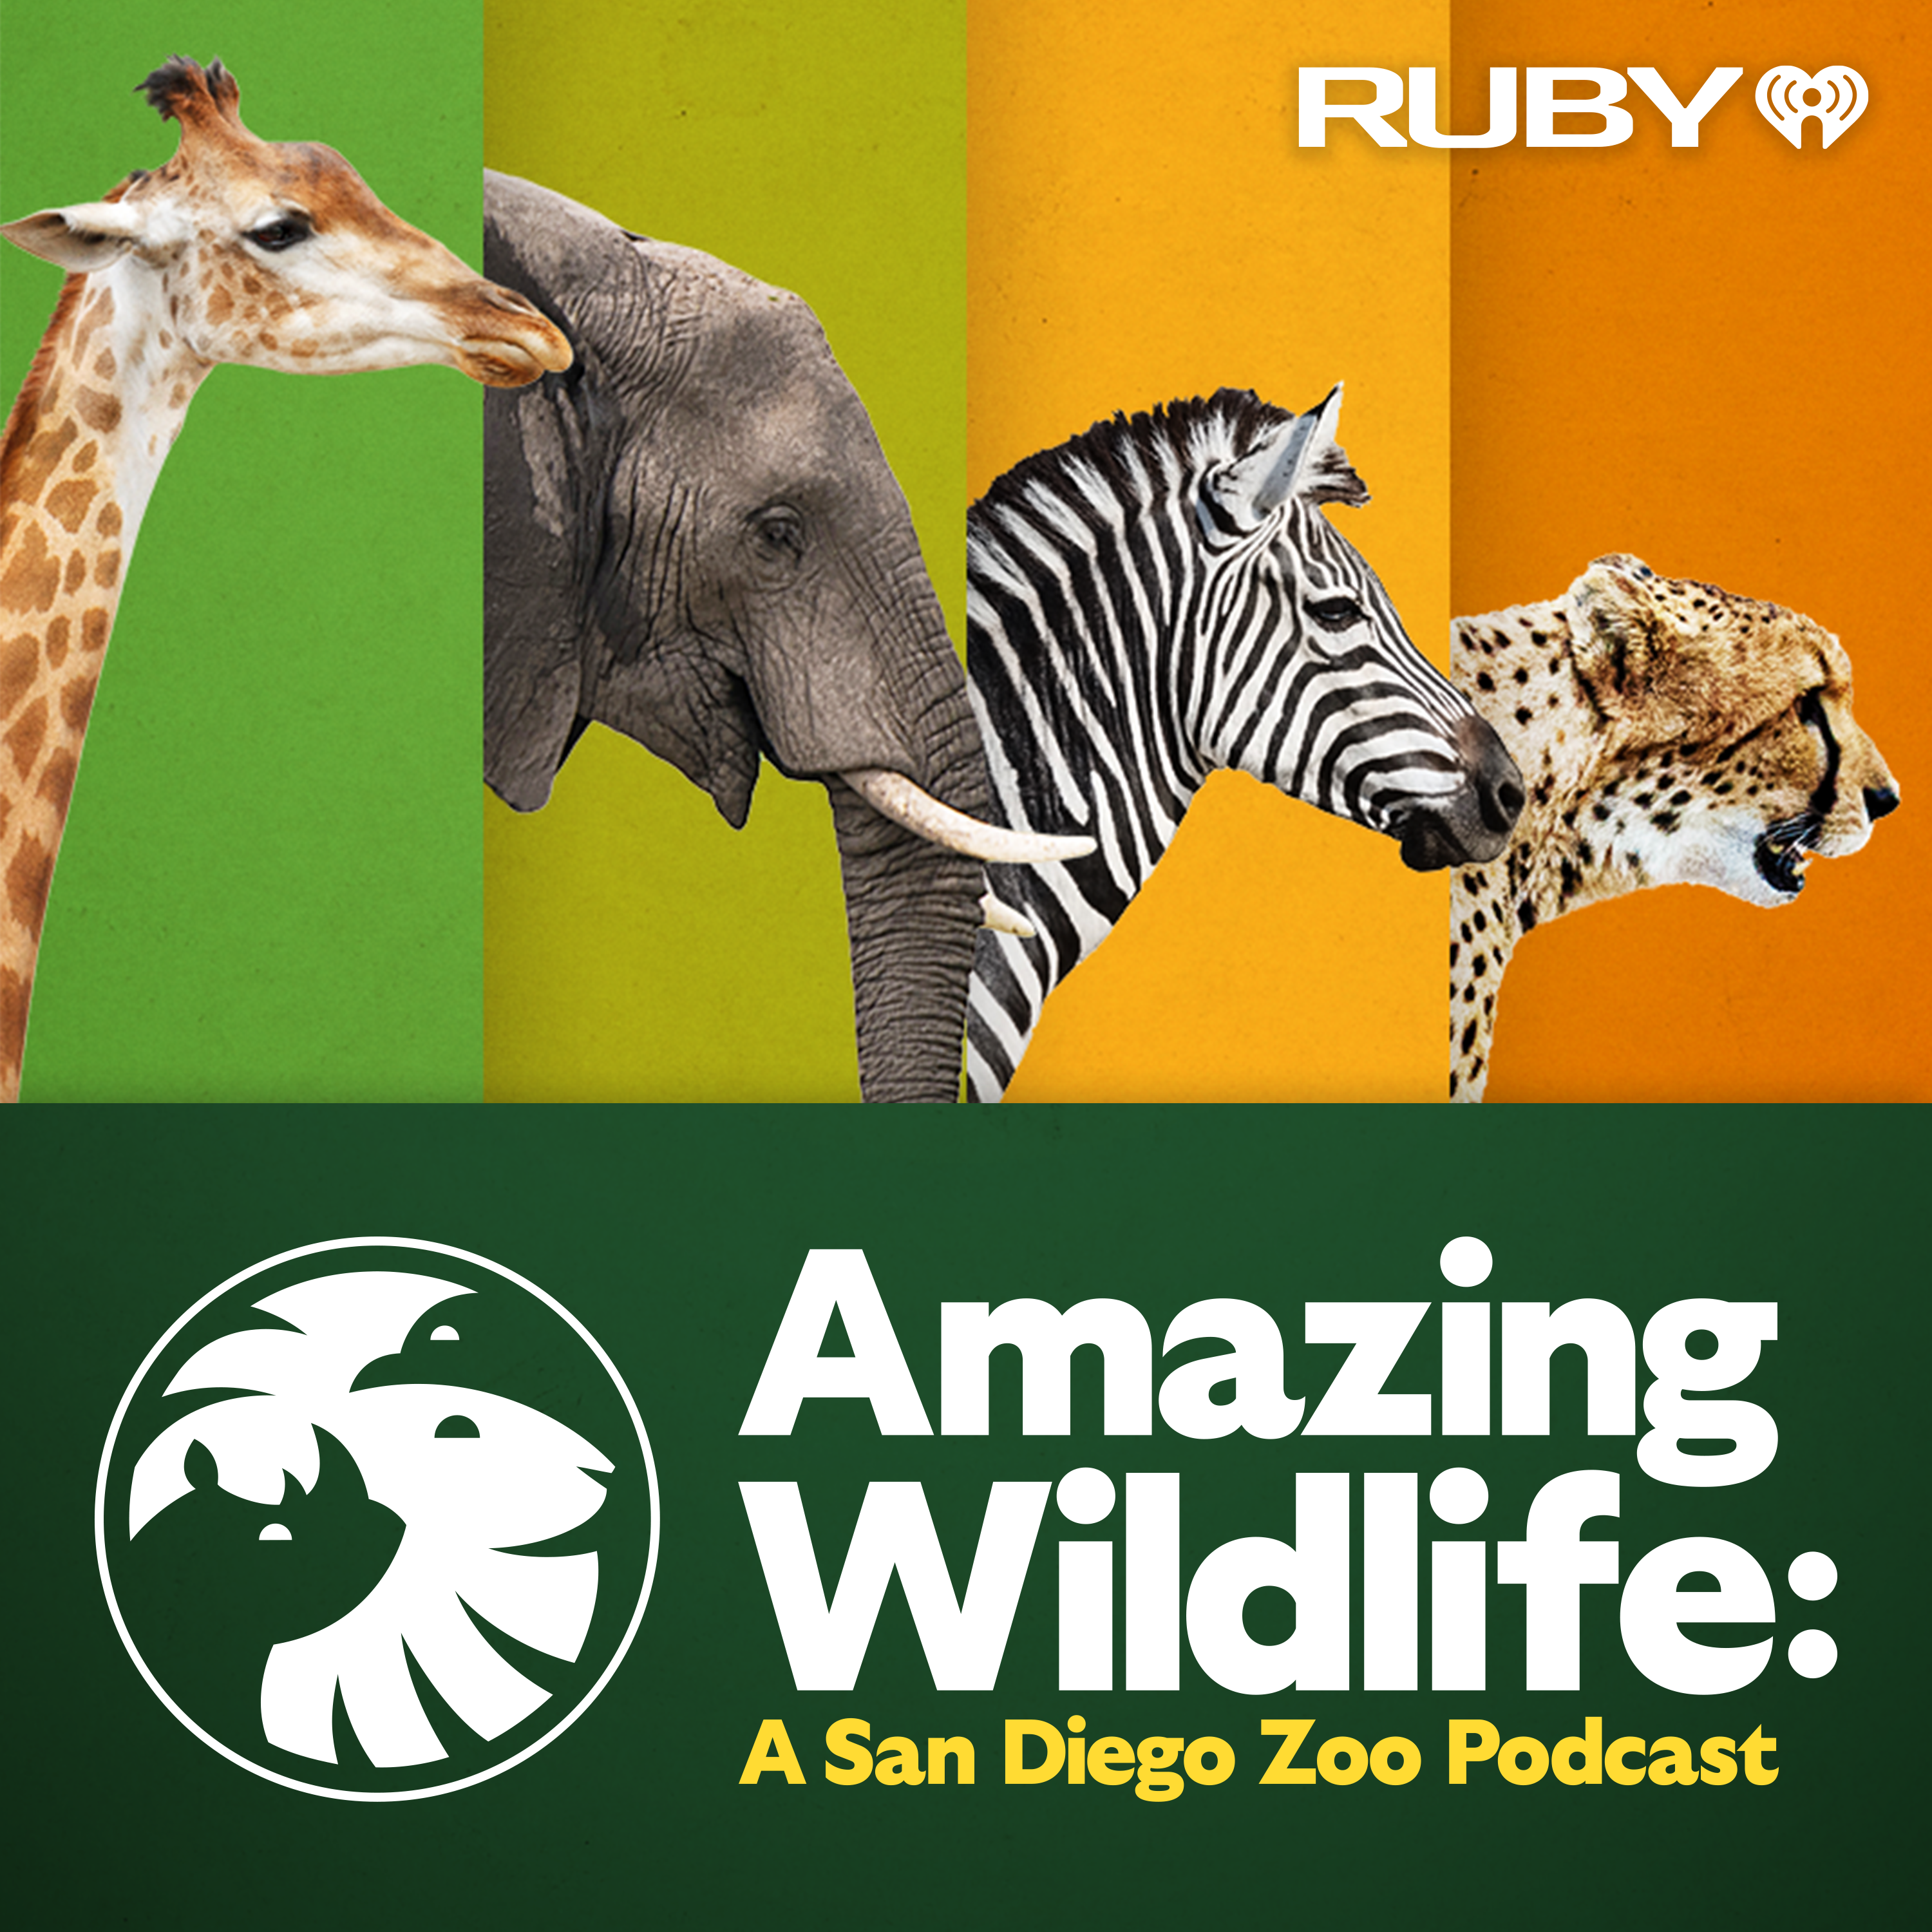 Announcing Season 3 of Amazing Wildlife: A San Diego Zoo Podcast